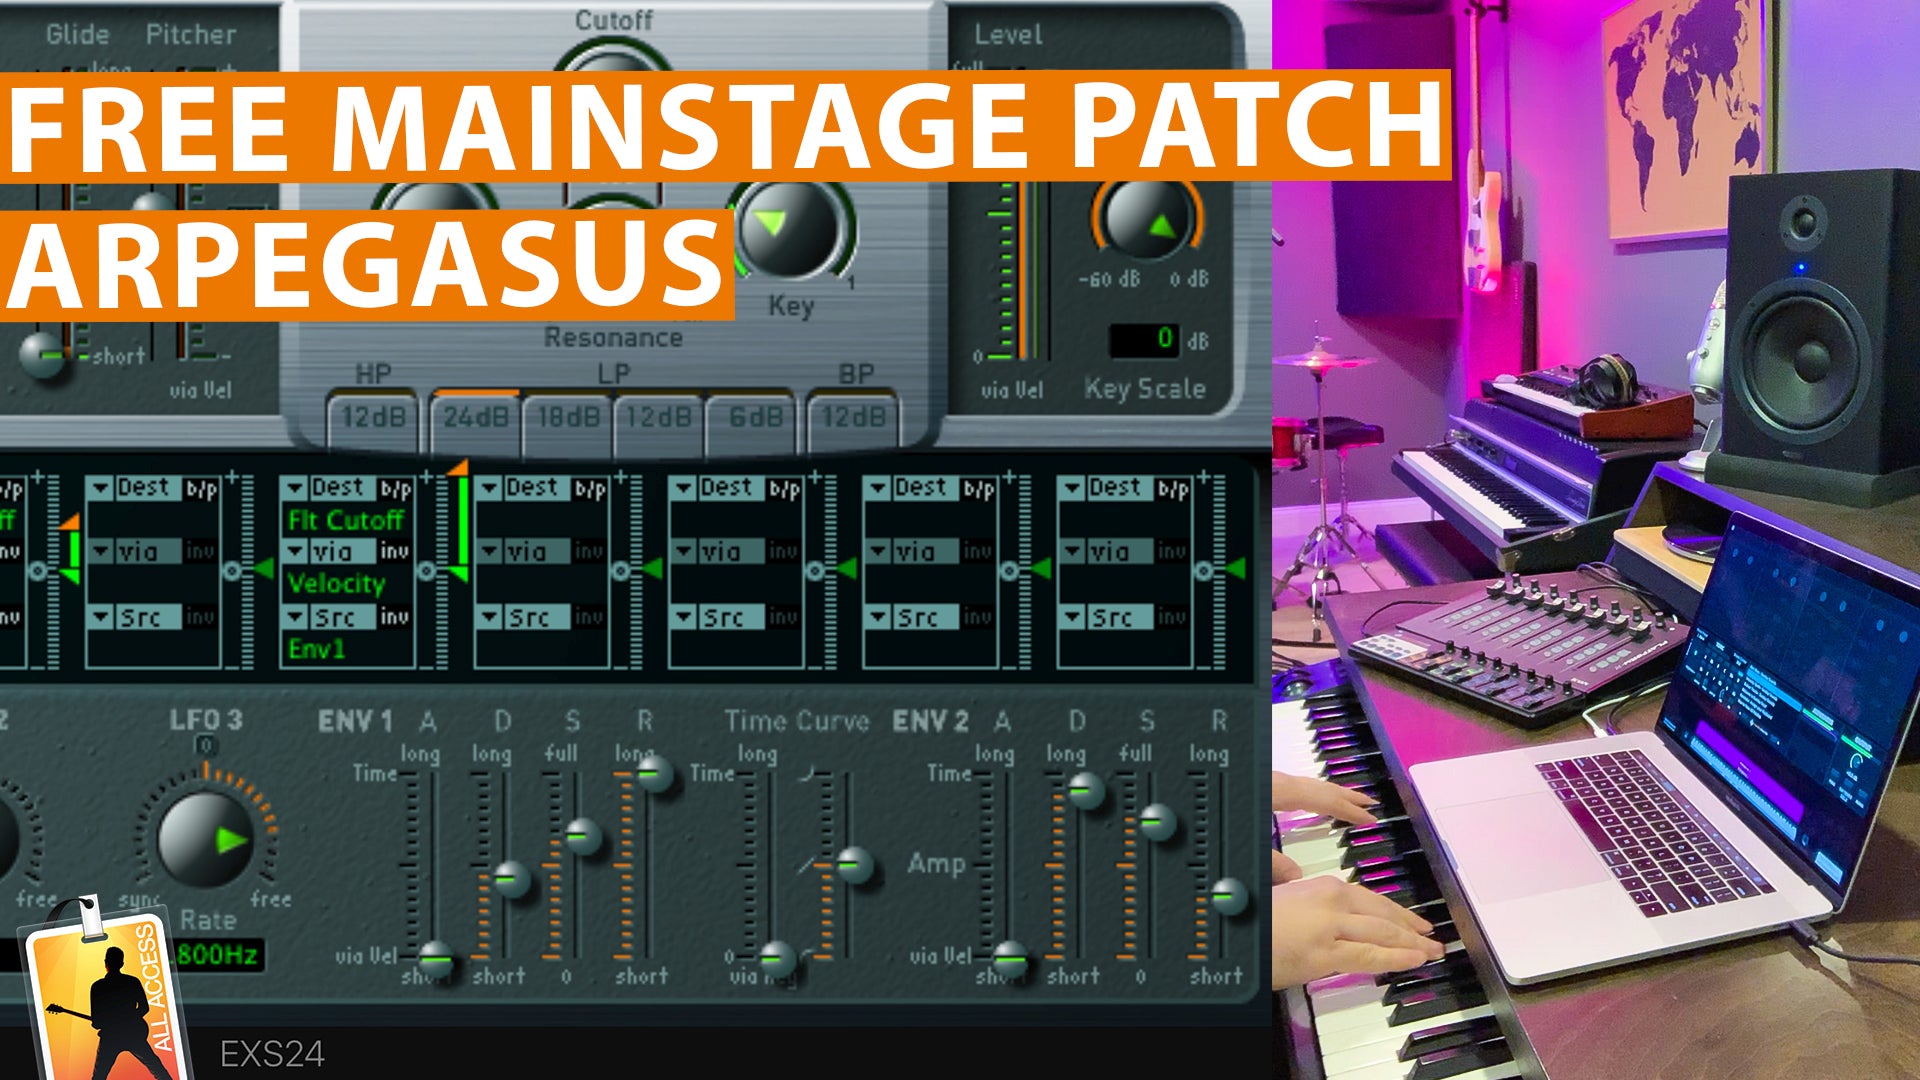 Free MainStage Worship Patch! - Arpegasus Aggressive FM Arp Synth!